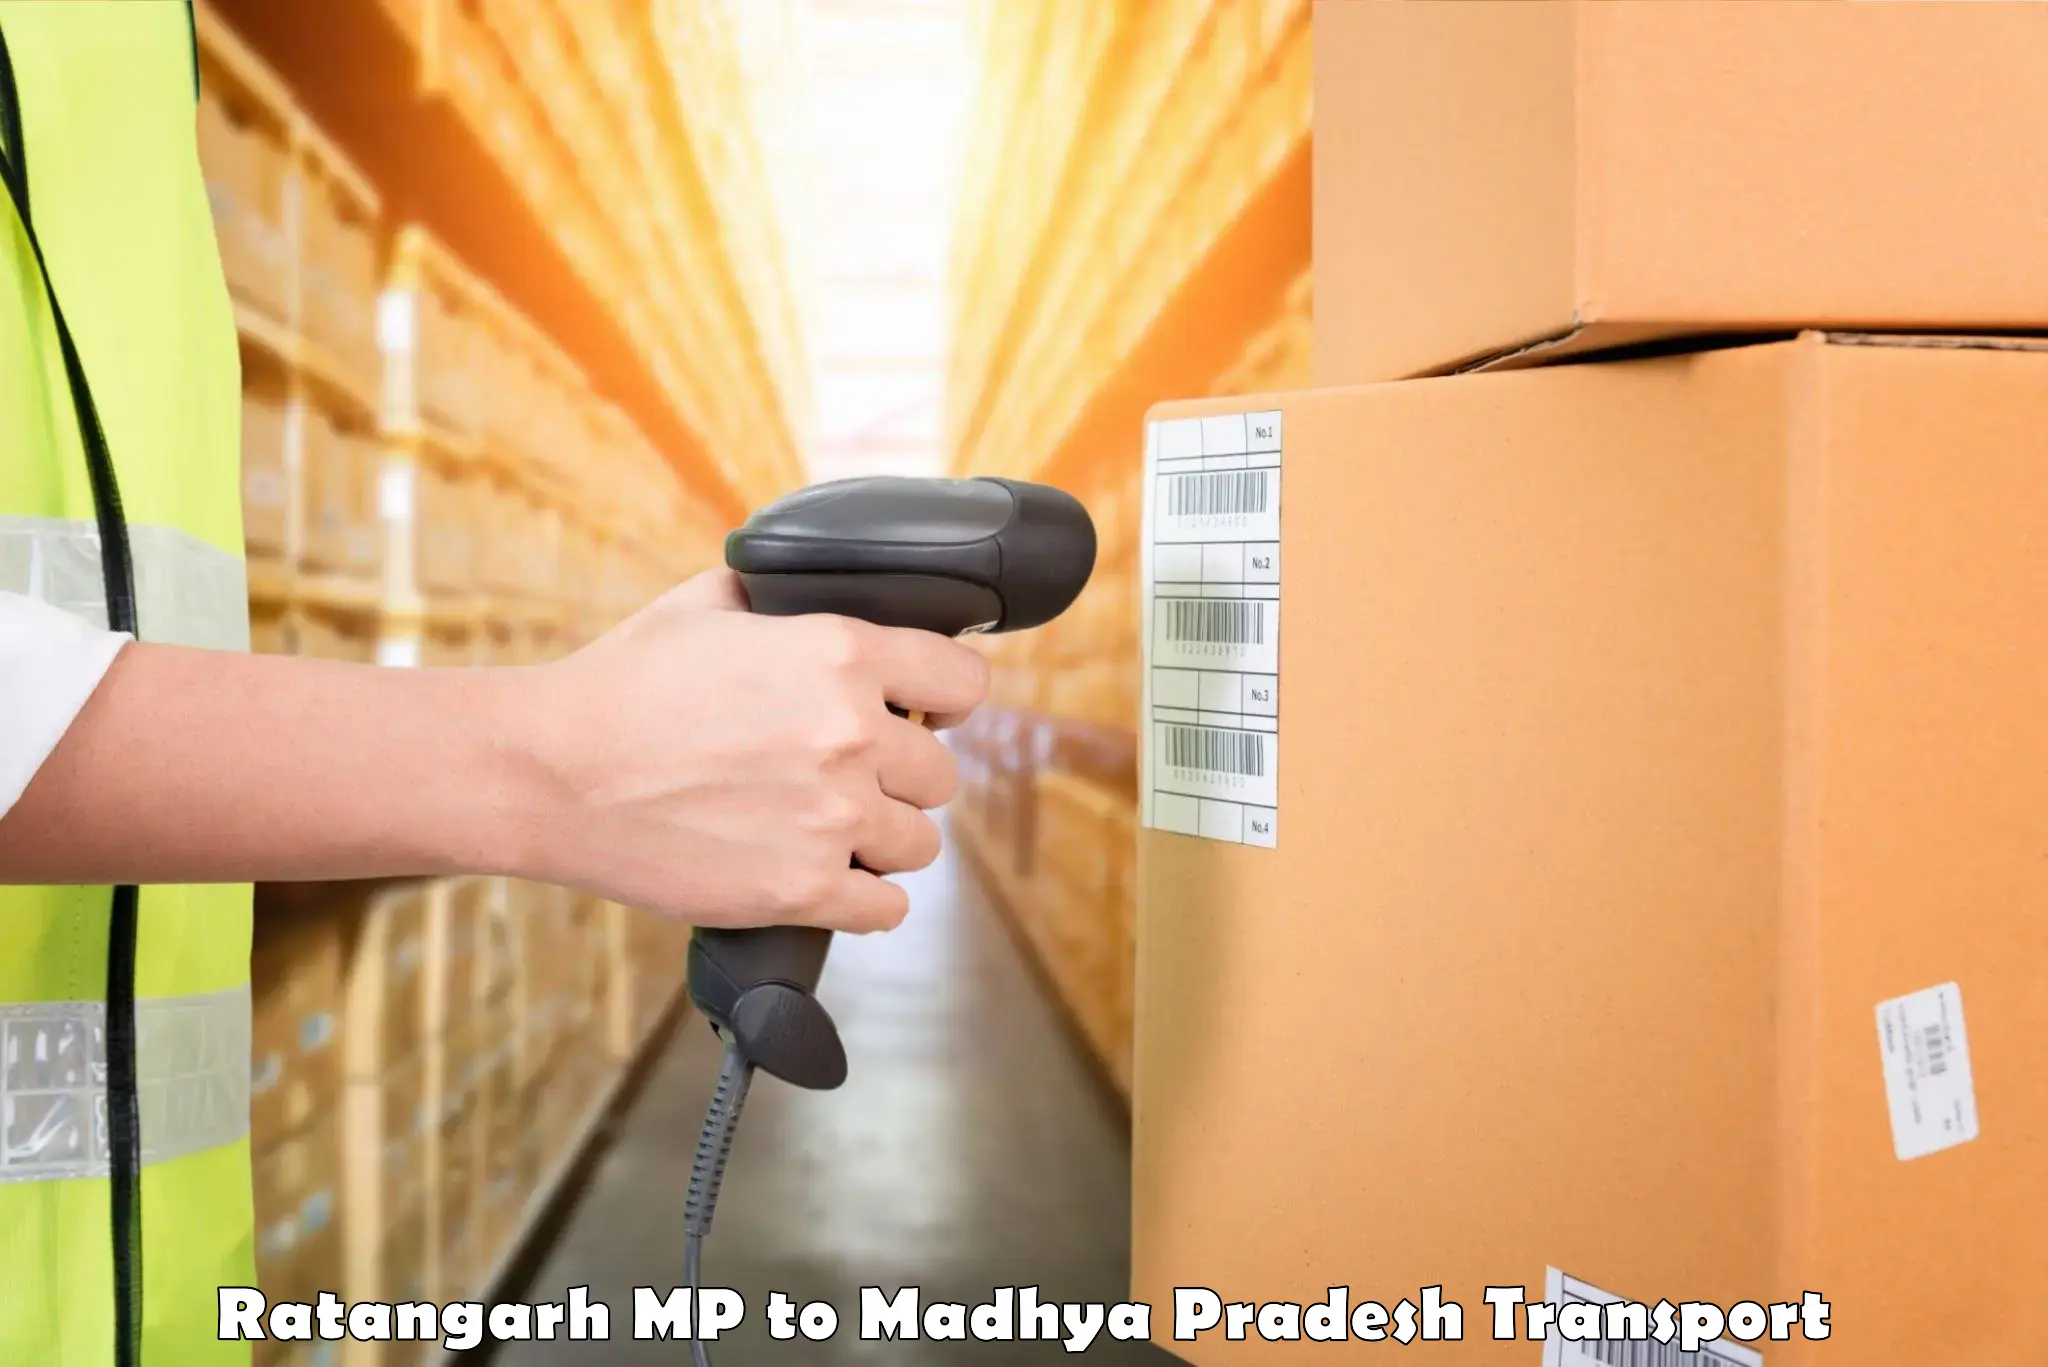 Truck transport companies in India Ratangarh MP to Gwalior